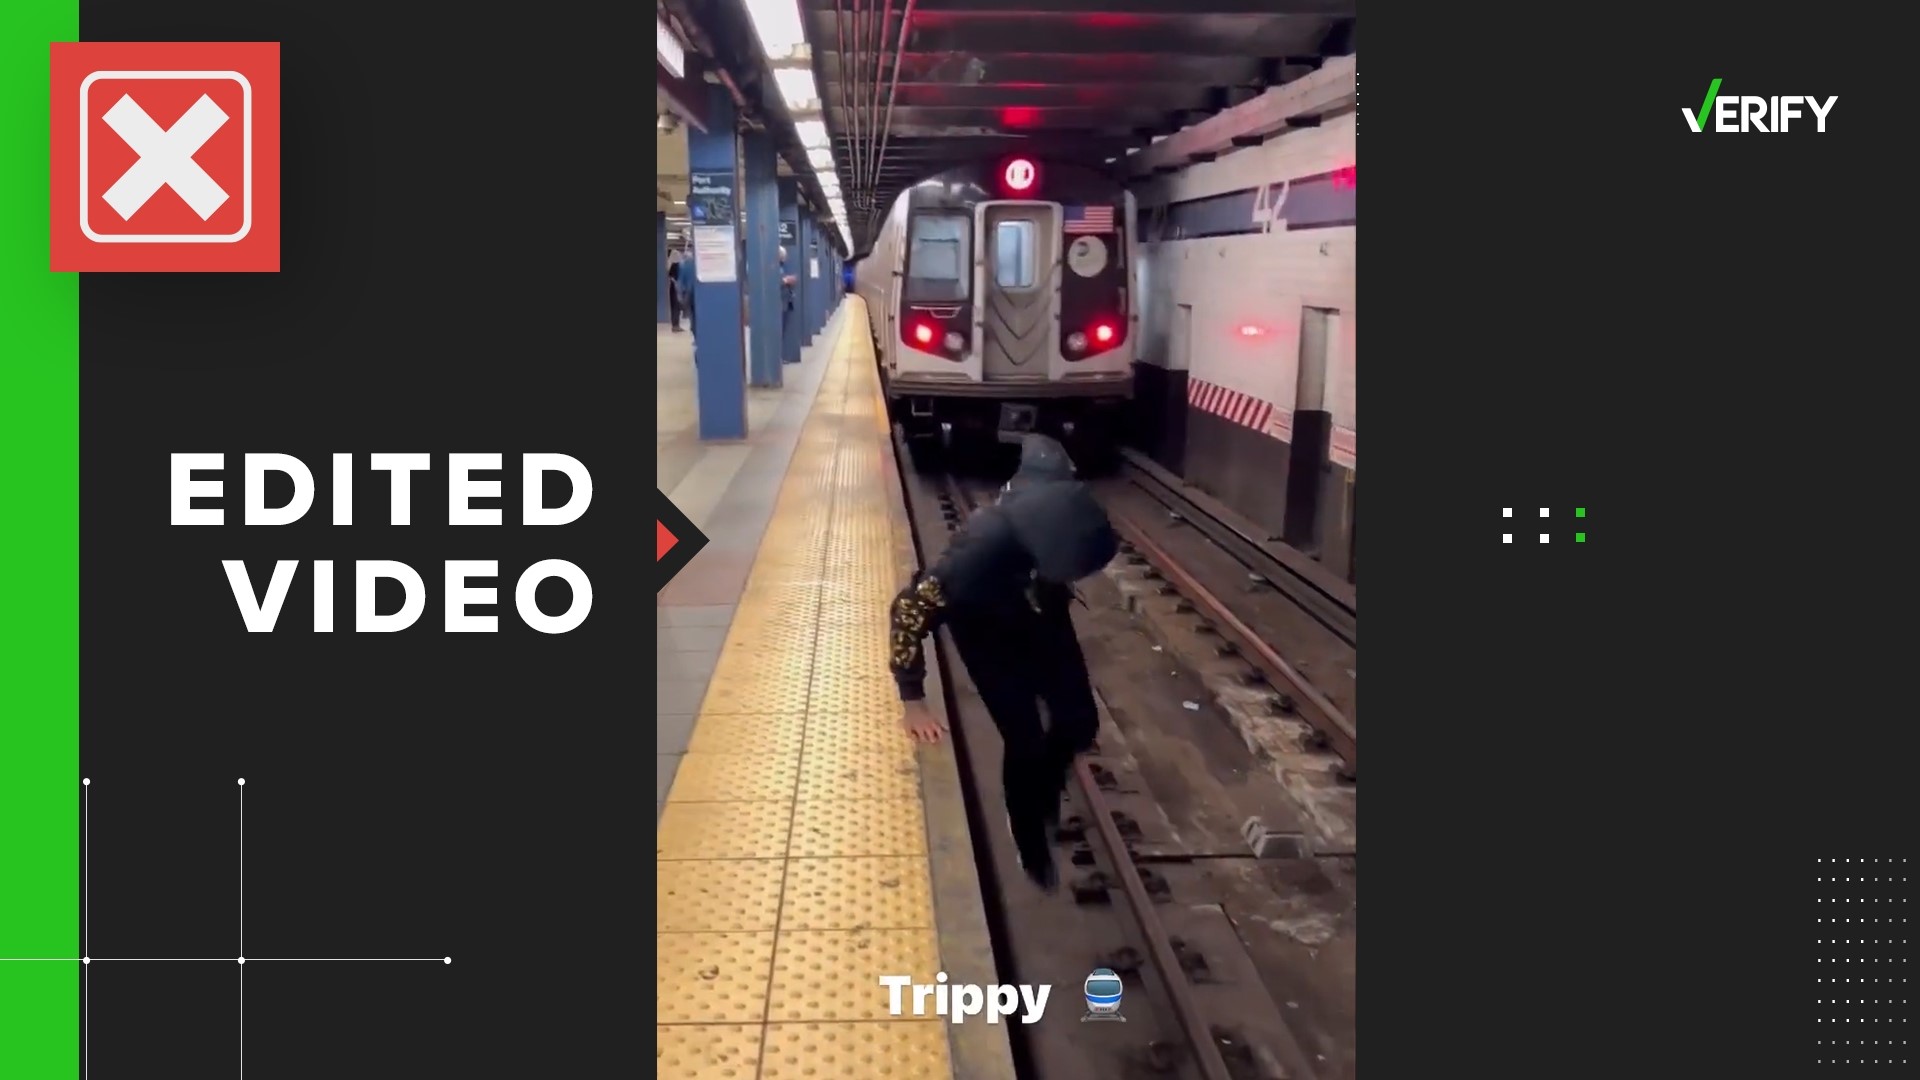 A viral stunt video claims to show a man jumping from the subway tracks onto the platform moments before a train passes, but it was edited.